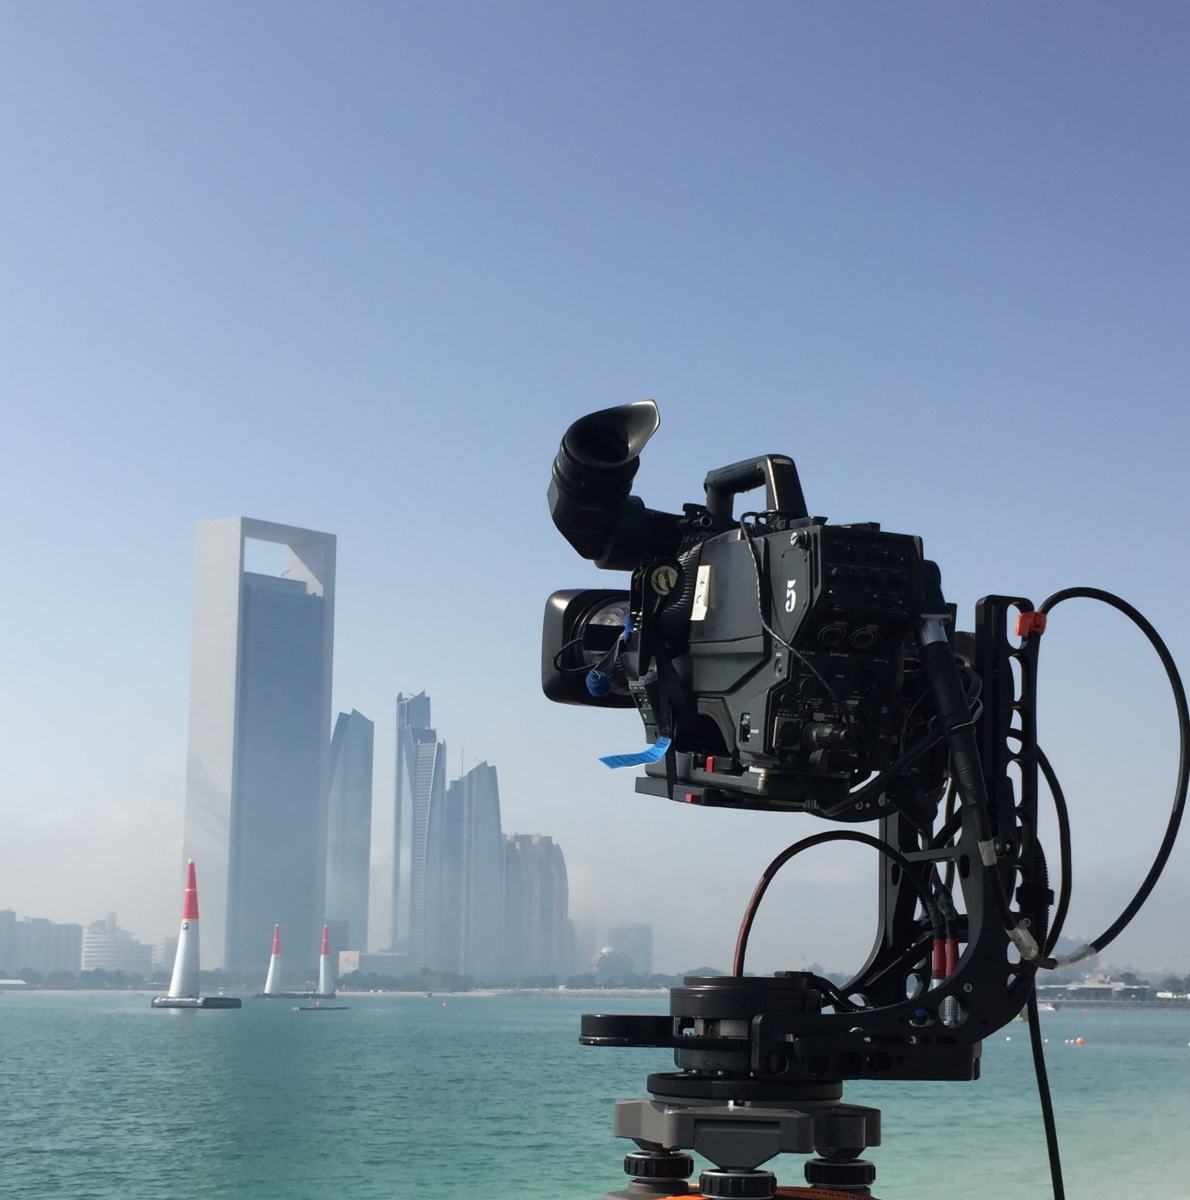 The L40TV filming the Red Bull Air Race in Abu Dhabi